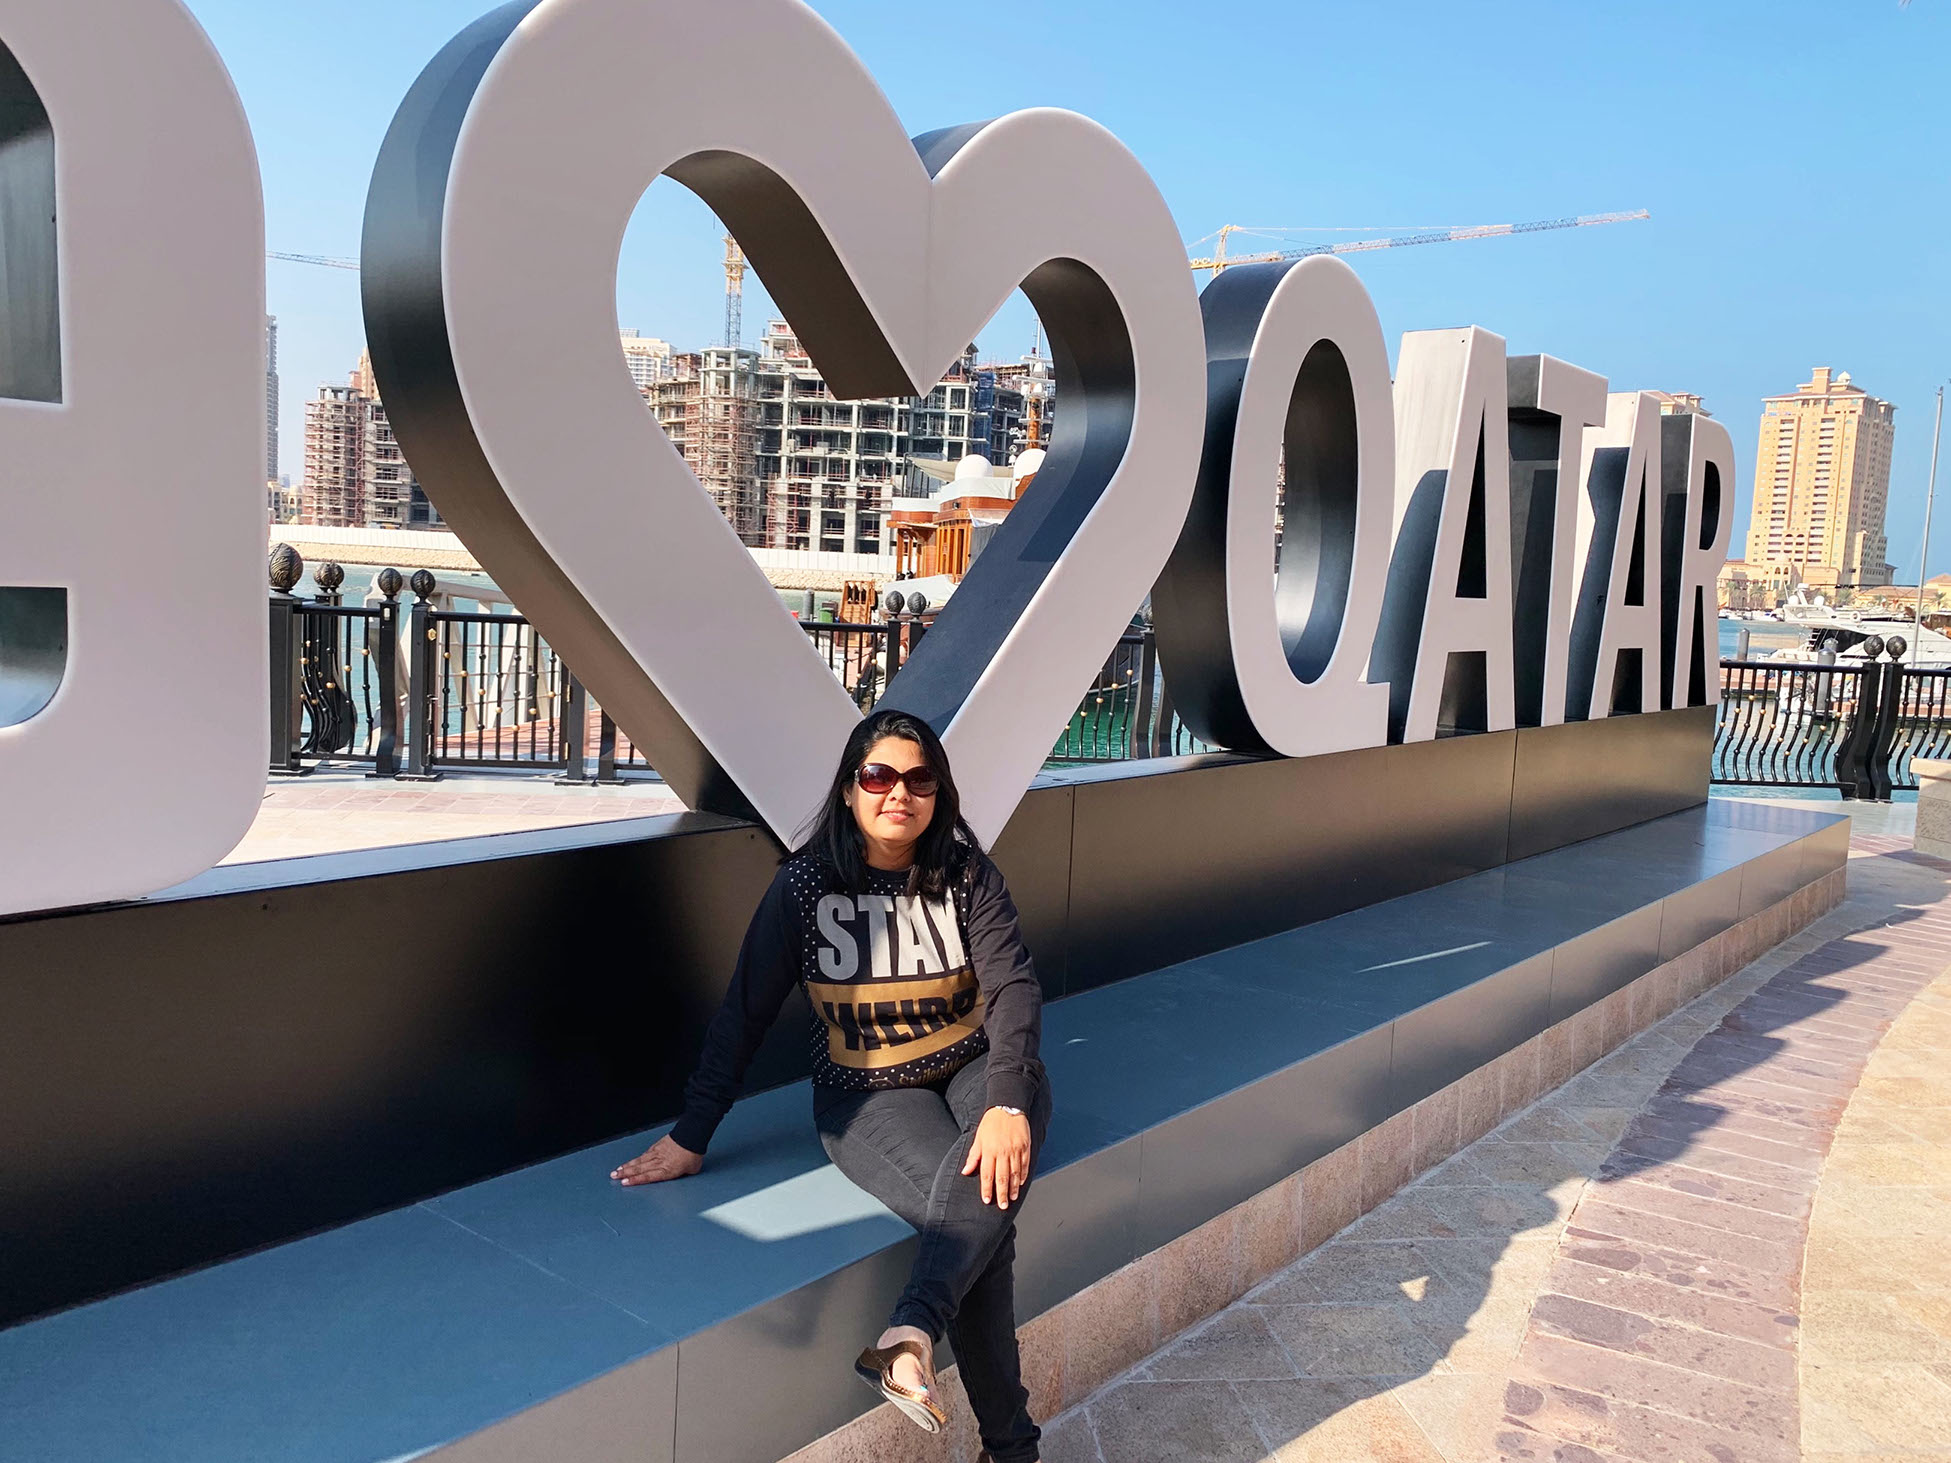 Visitors pose for a picture at the "I Love Qatar" signboard